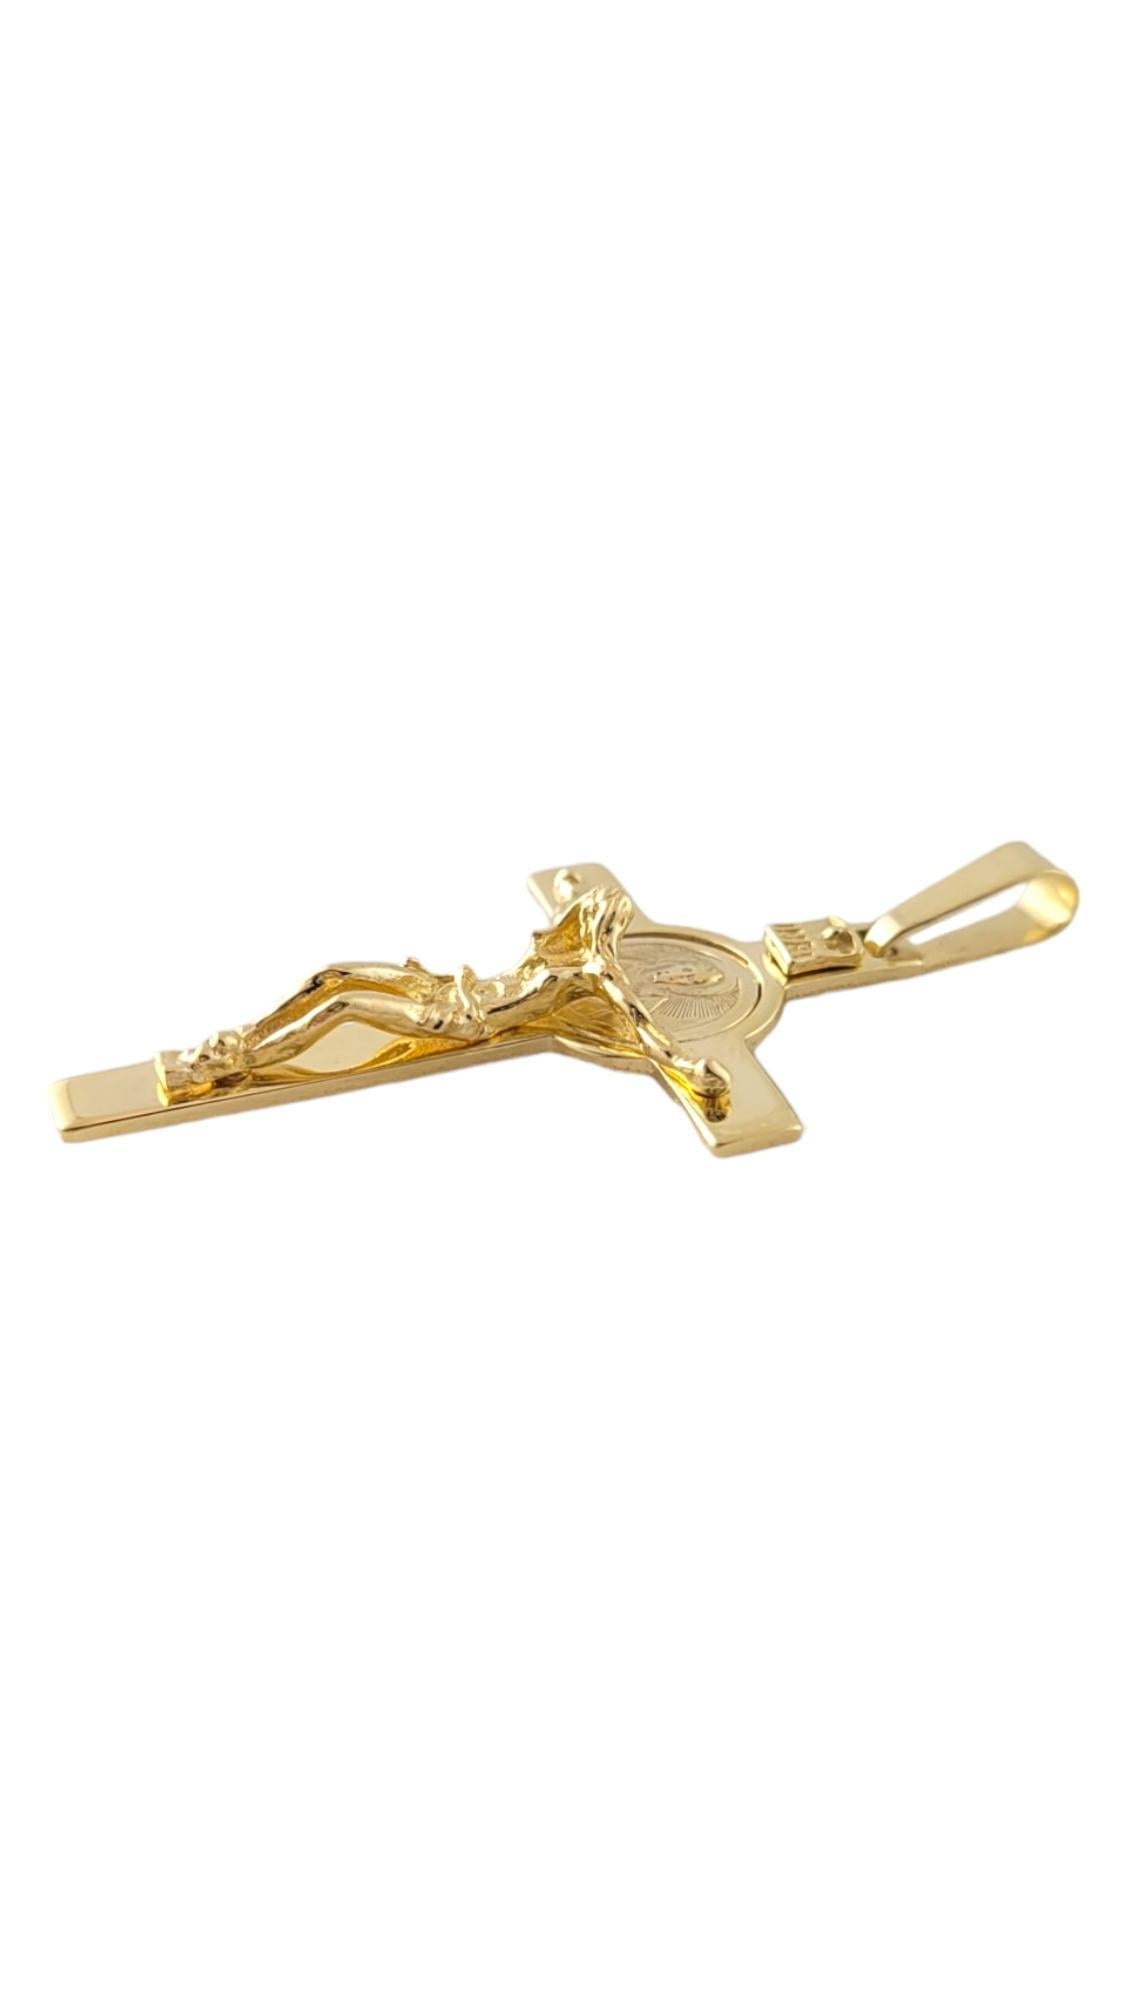 14K Yellow Gold Crucifix Pendant

This beautiful crucifix pendant is crafted from 14K yellow gold and would look gorgeous on anybody!

Size: 36.96mm X 23.49mm X 5.89mm

Weight: 3.02 dwt/ 4.6 g

Hallmark: Italy 14KT

Very good condition,